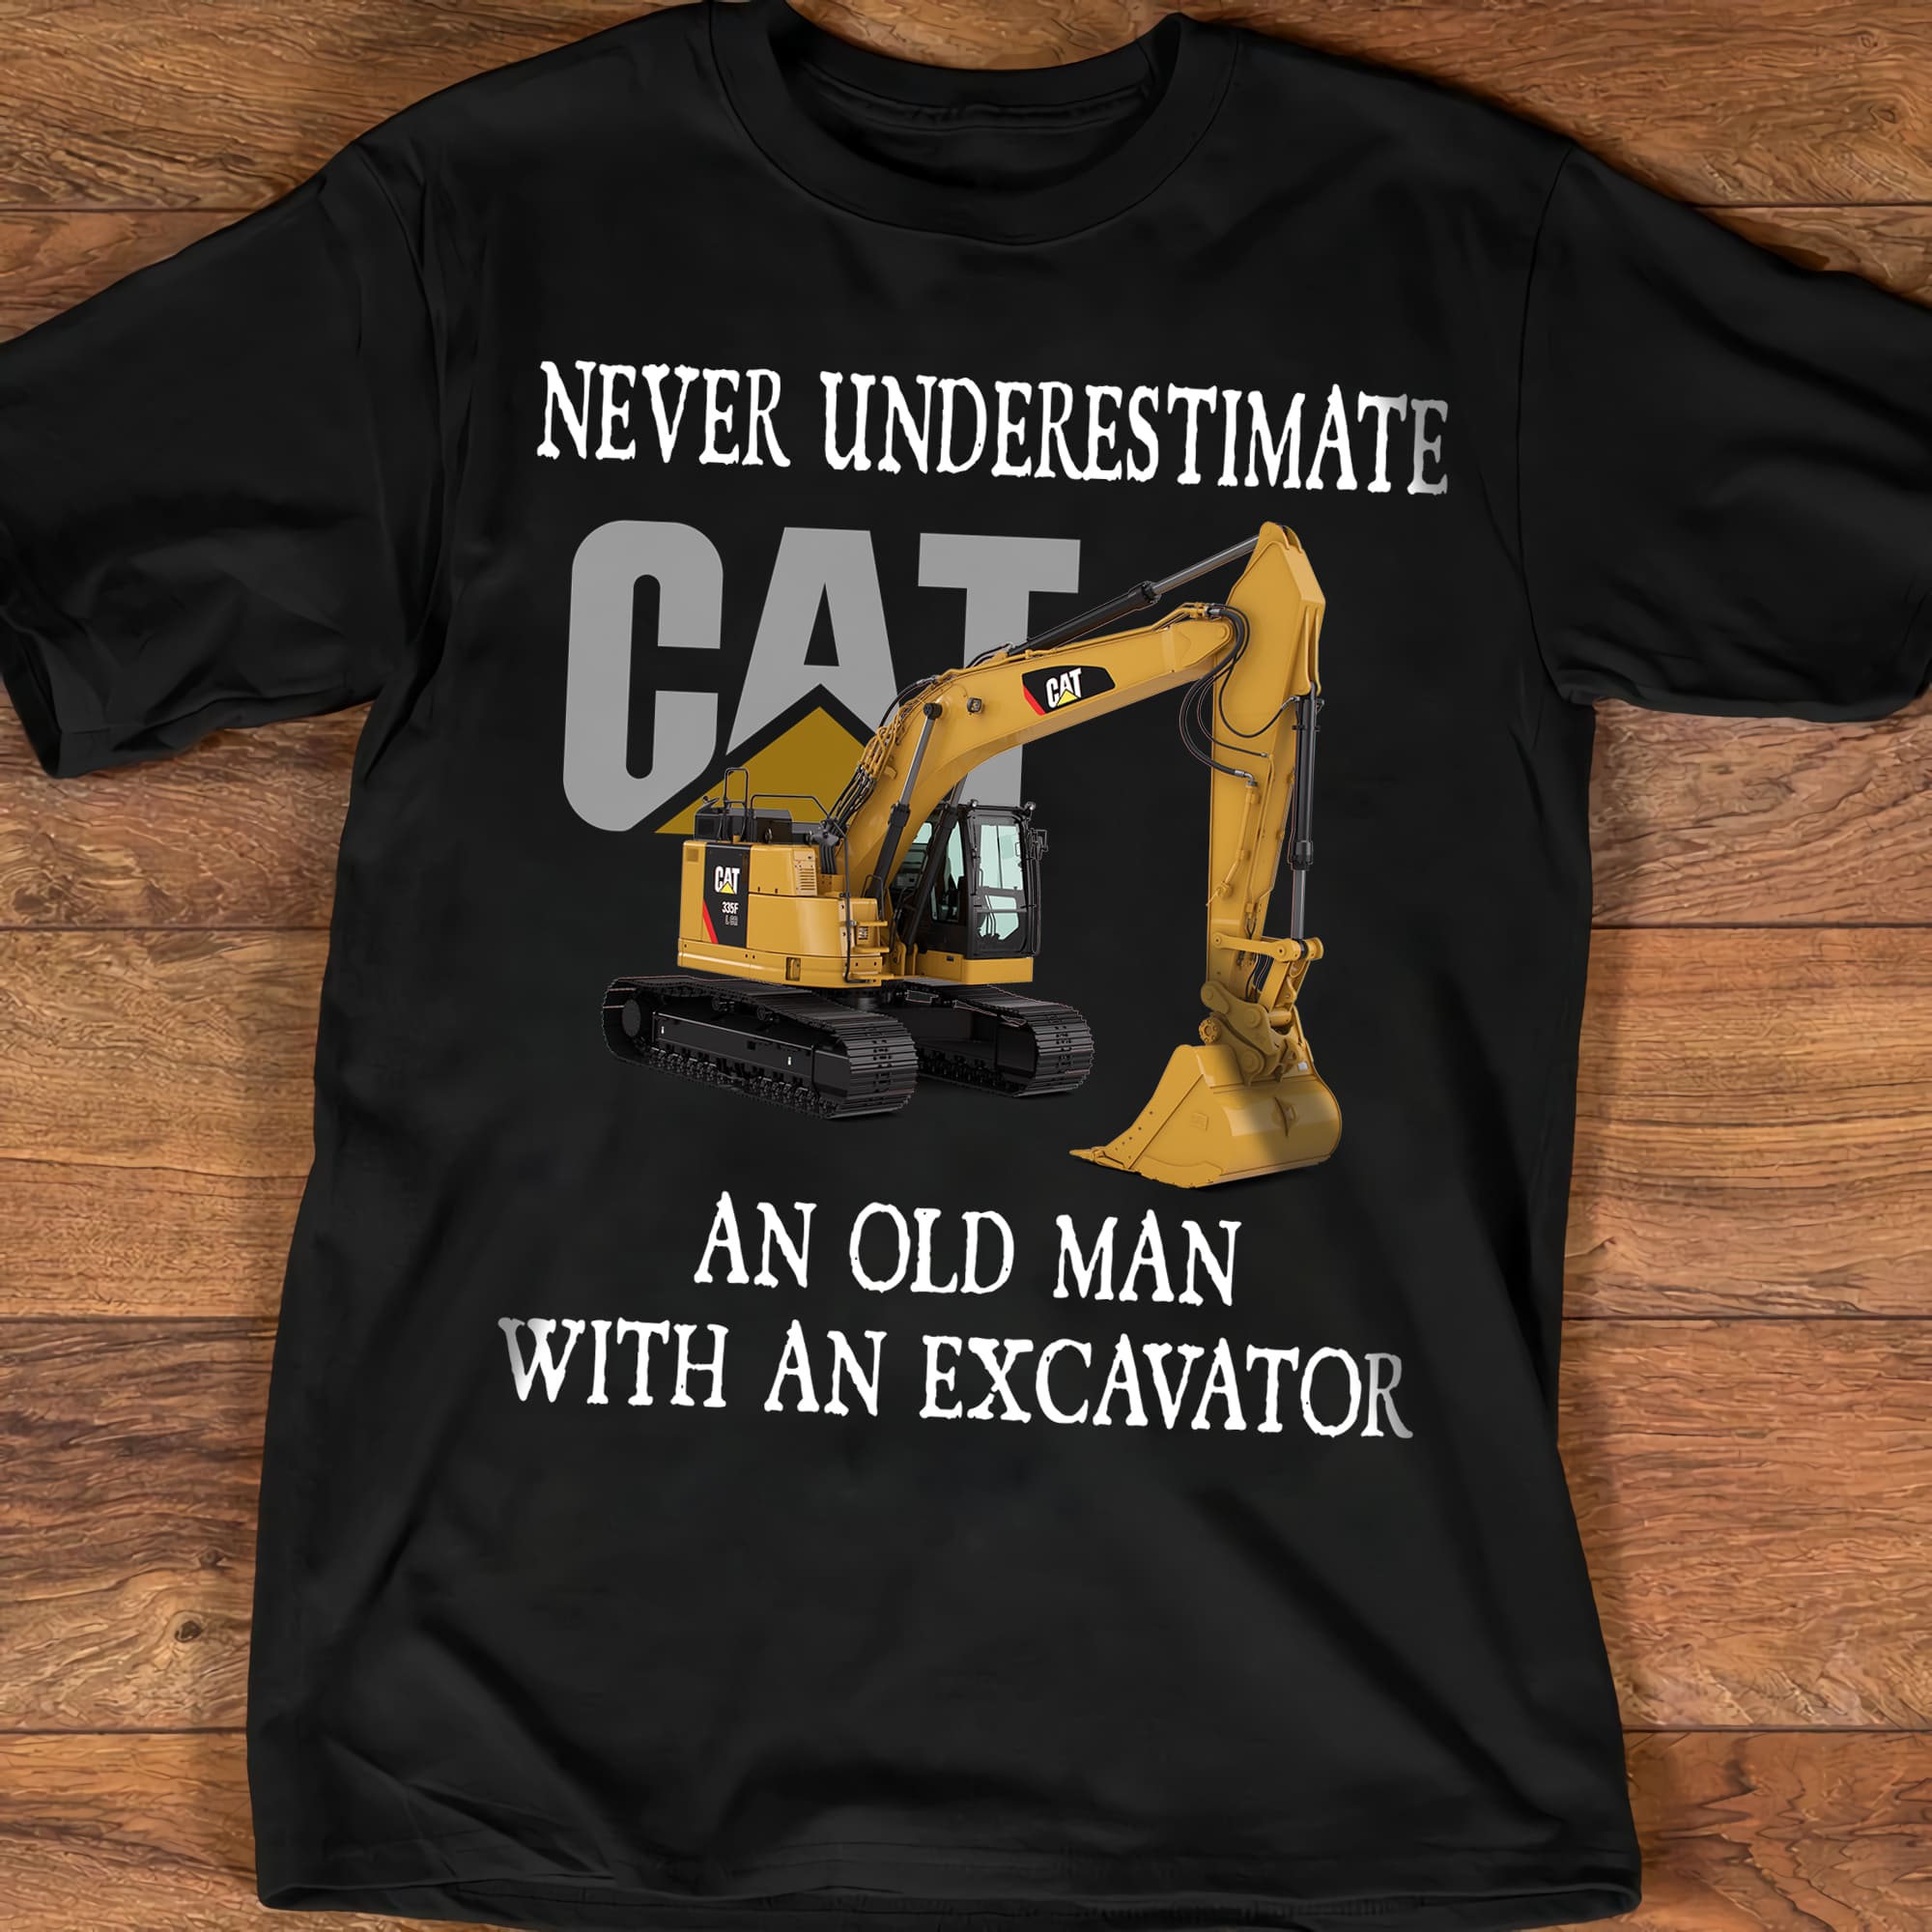 Never underestimate an ol dman with an excavator - Excavator driver, Old excavator driver